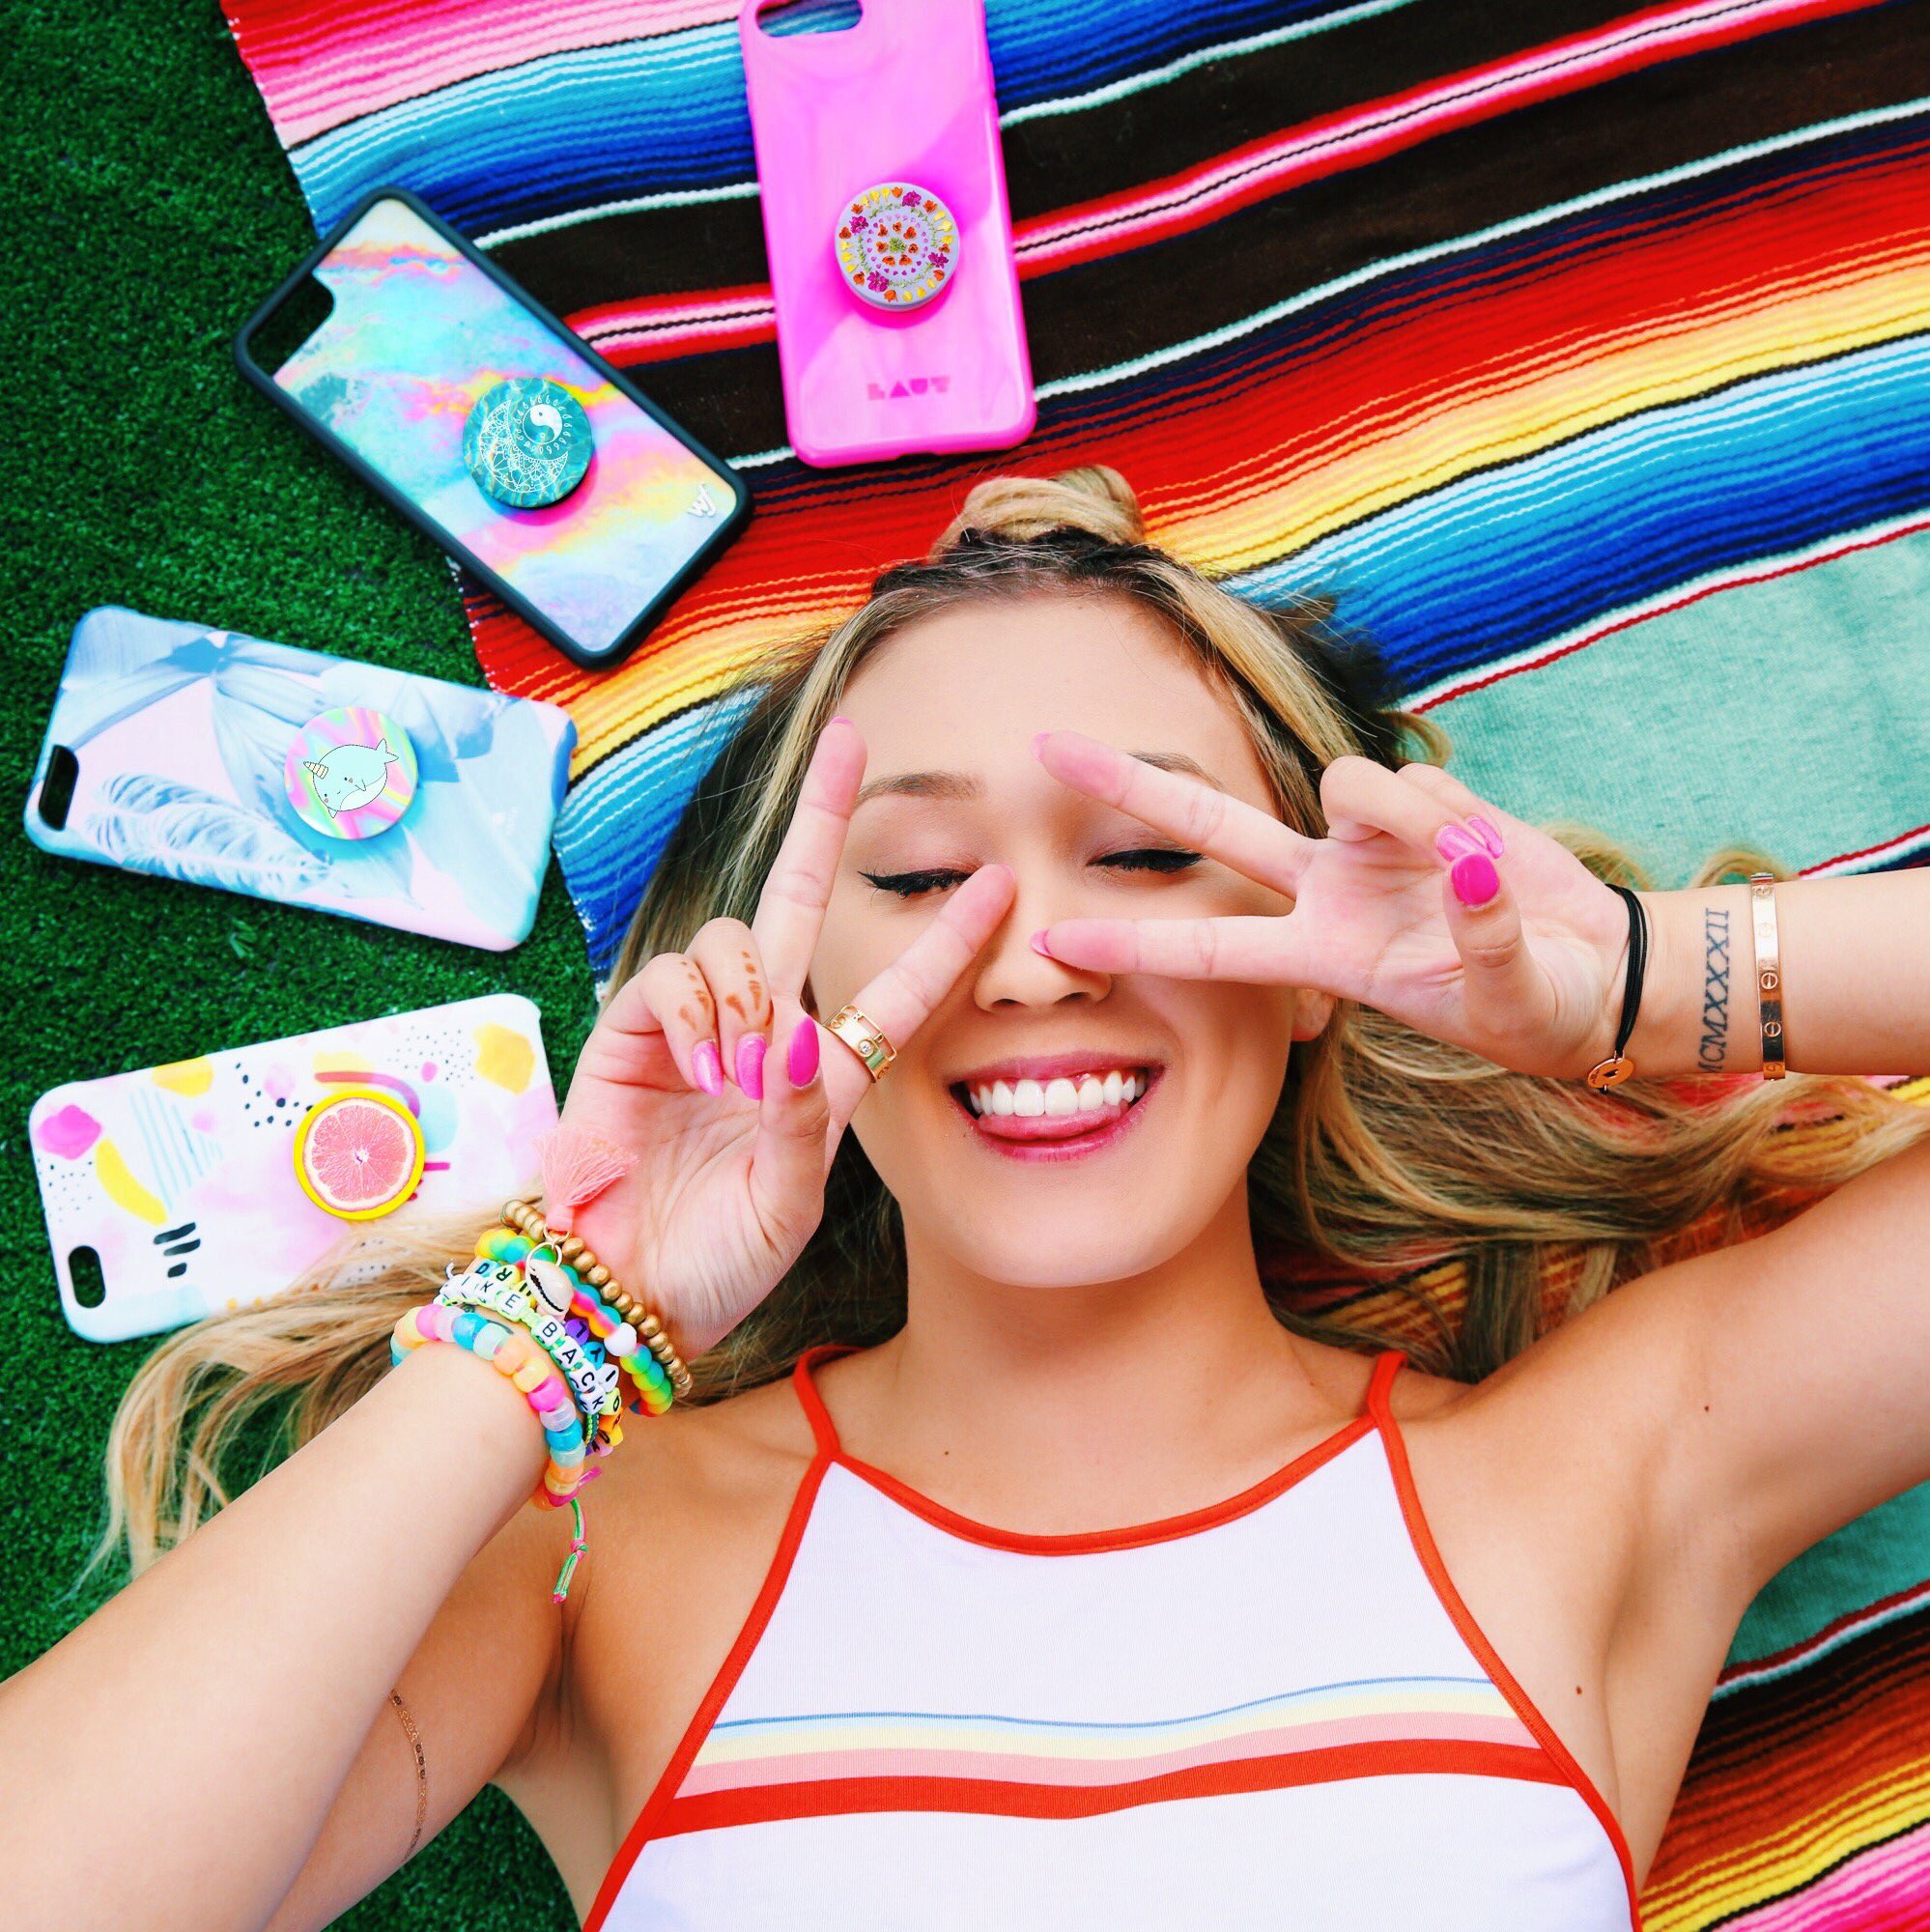 on Twitter: "LAURDIY POPSOCKETS ARE GONE FOREVER LAST CHANCE TO BUY! 🌙🥝🌈🐳🌼💖 https://t.co/N4japU1pdk https://t.co/FPUpQOFBH3" / Twitter